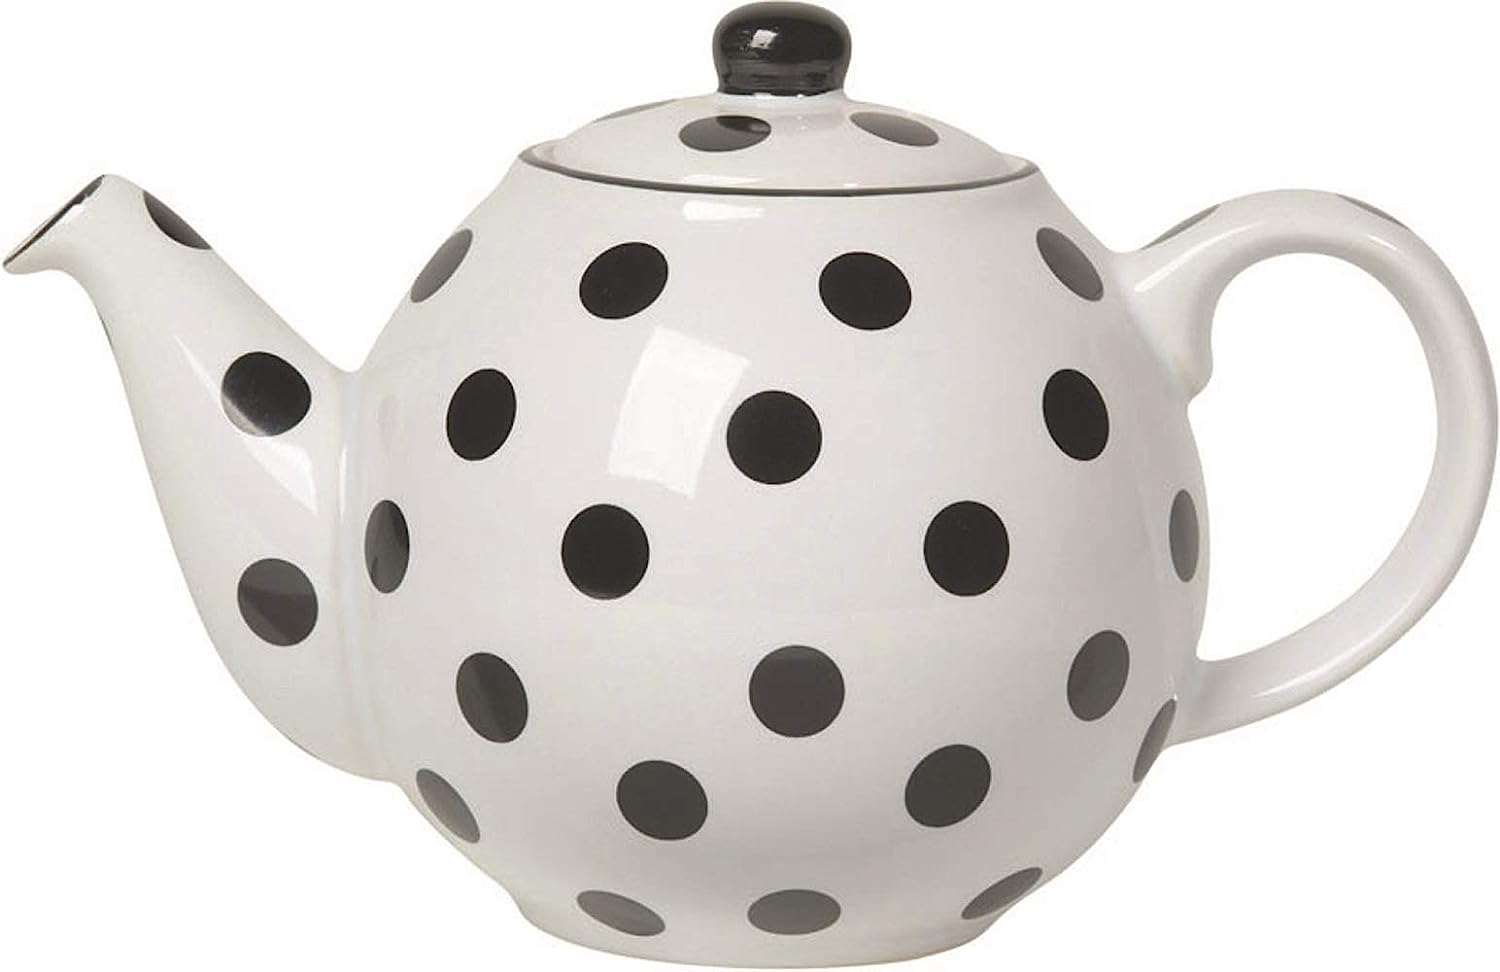 London Pottery Polka Dot Teapot with Strainer, White/Black, 2 Cups (500 ml)